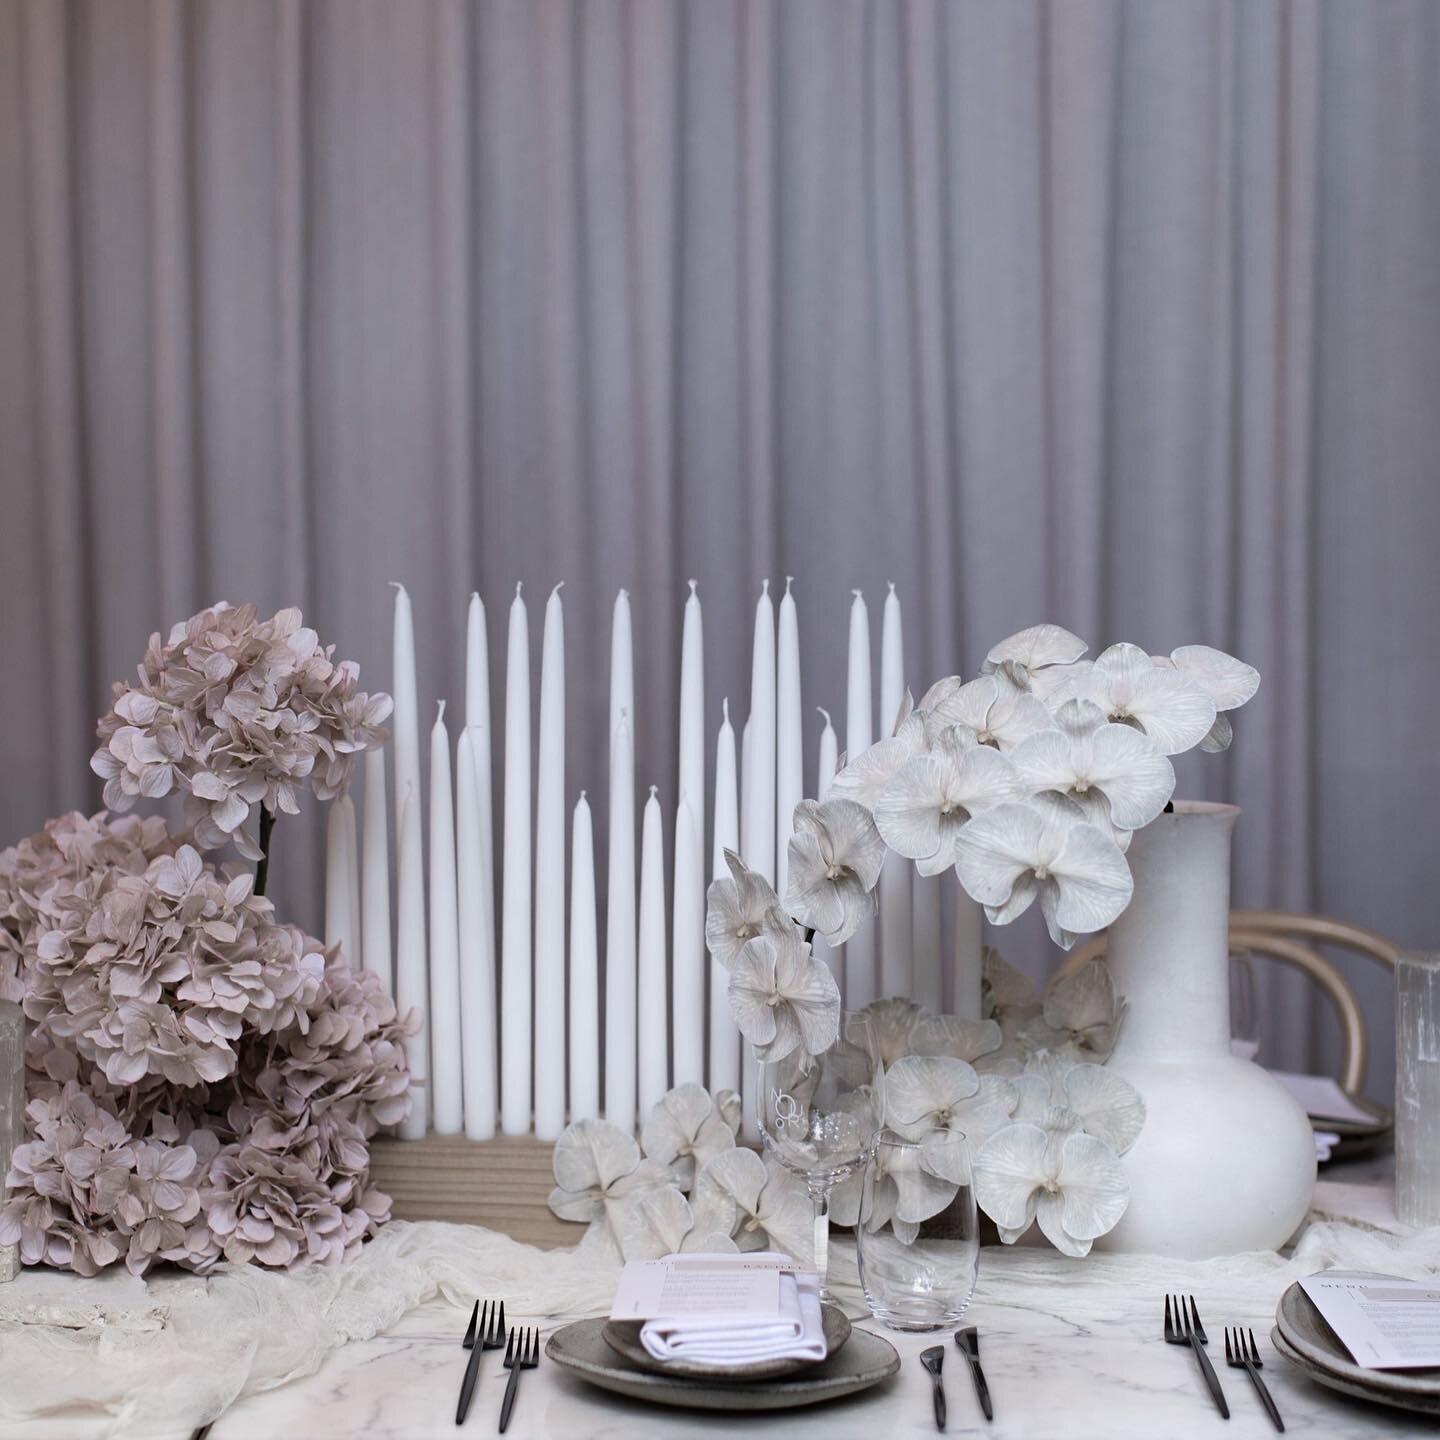 Setting the mood of muted romanticism with blushing florals + these stunning candles by @xrjcelebrations, @roxyjacenko + @jessingham 
-
Florals + Styling @thehuntedyard
Props @thecollectivehire
Photography @thisdayforward_weddings
Venue @nourrestaura